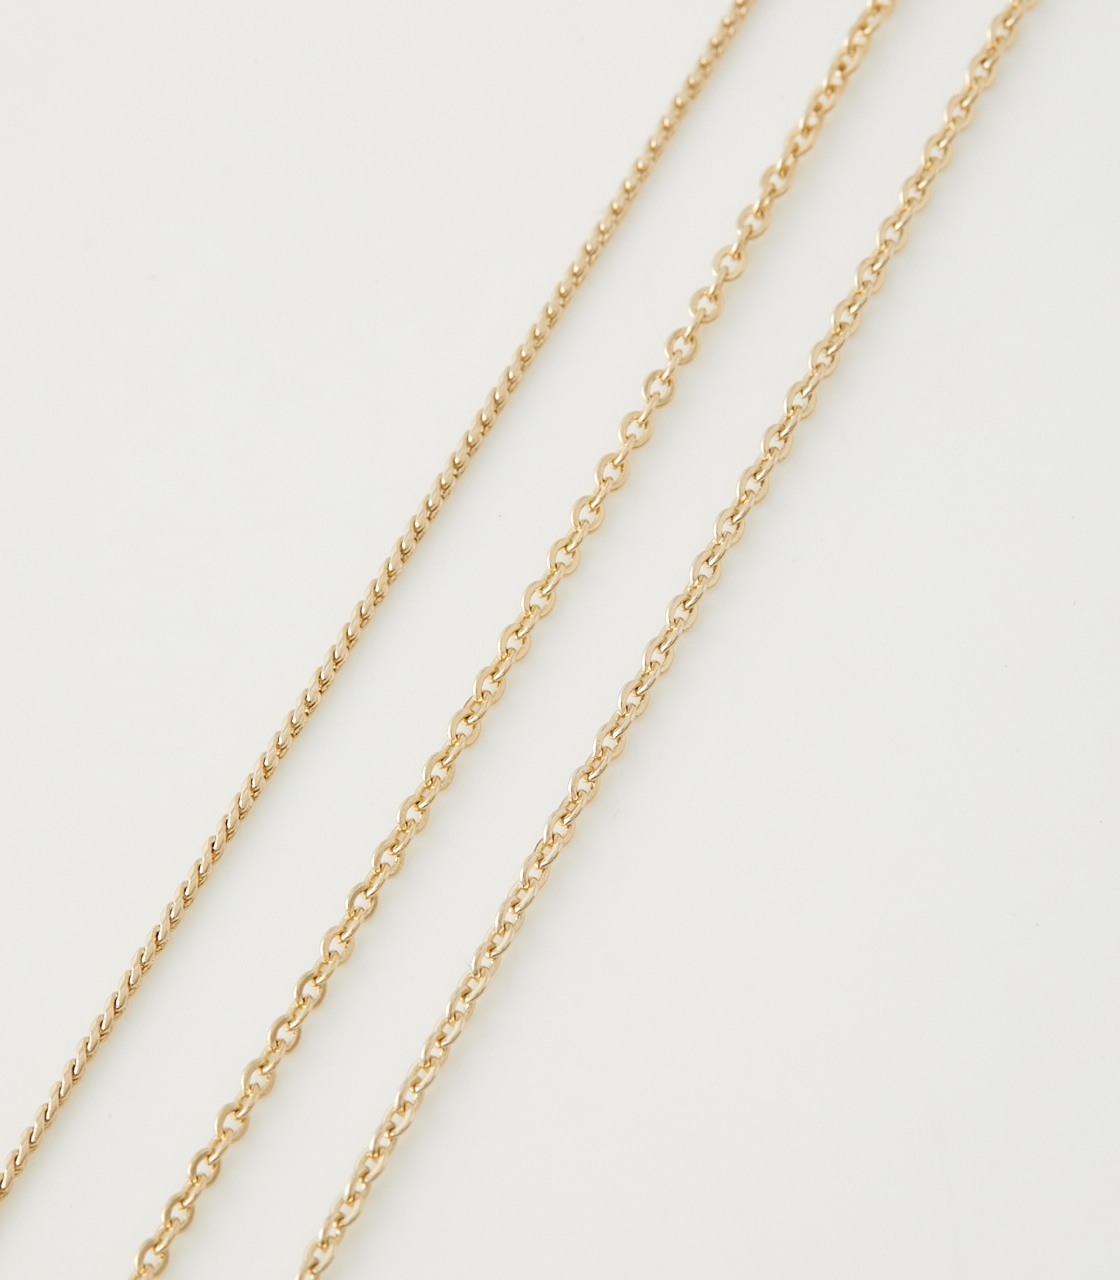 COIN THREE-STRAND NECKLACE/コインスリーストランドネックレス【MOOK54掲載 90359】 詳細画像 L/GLD 5